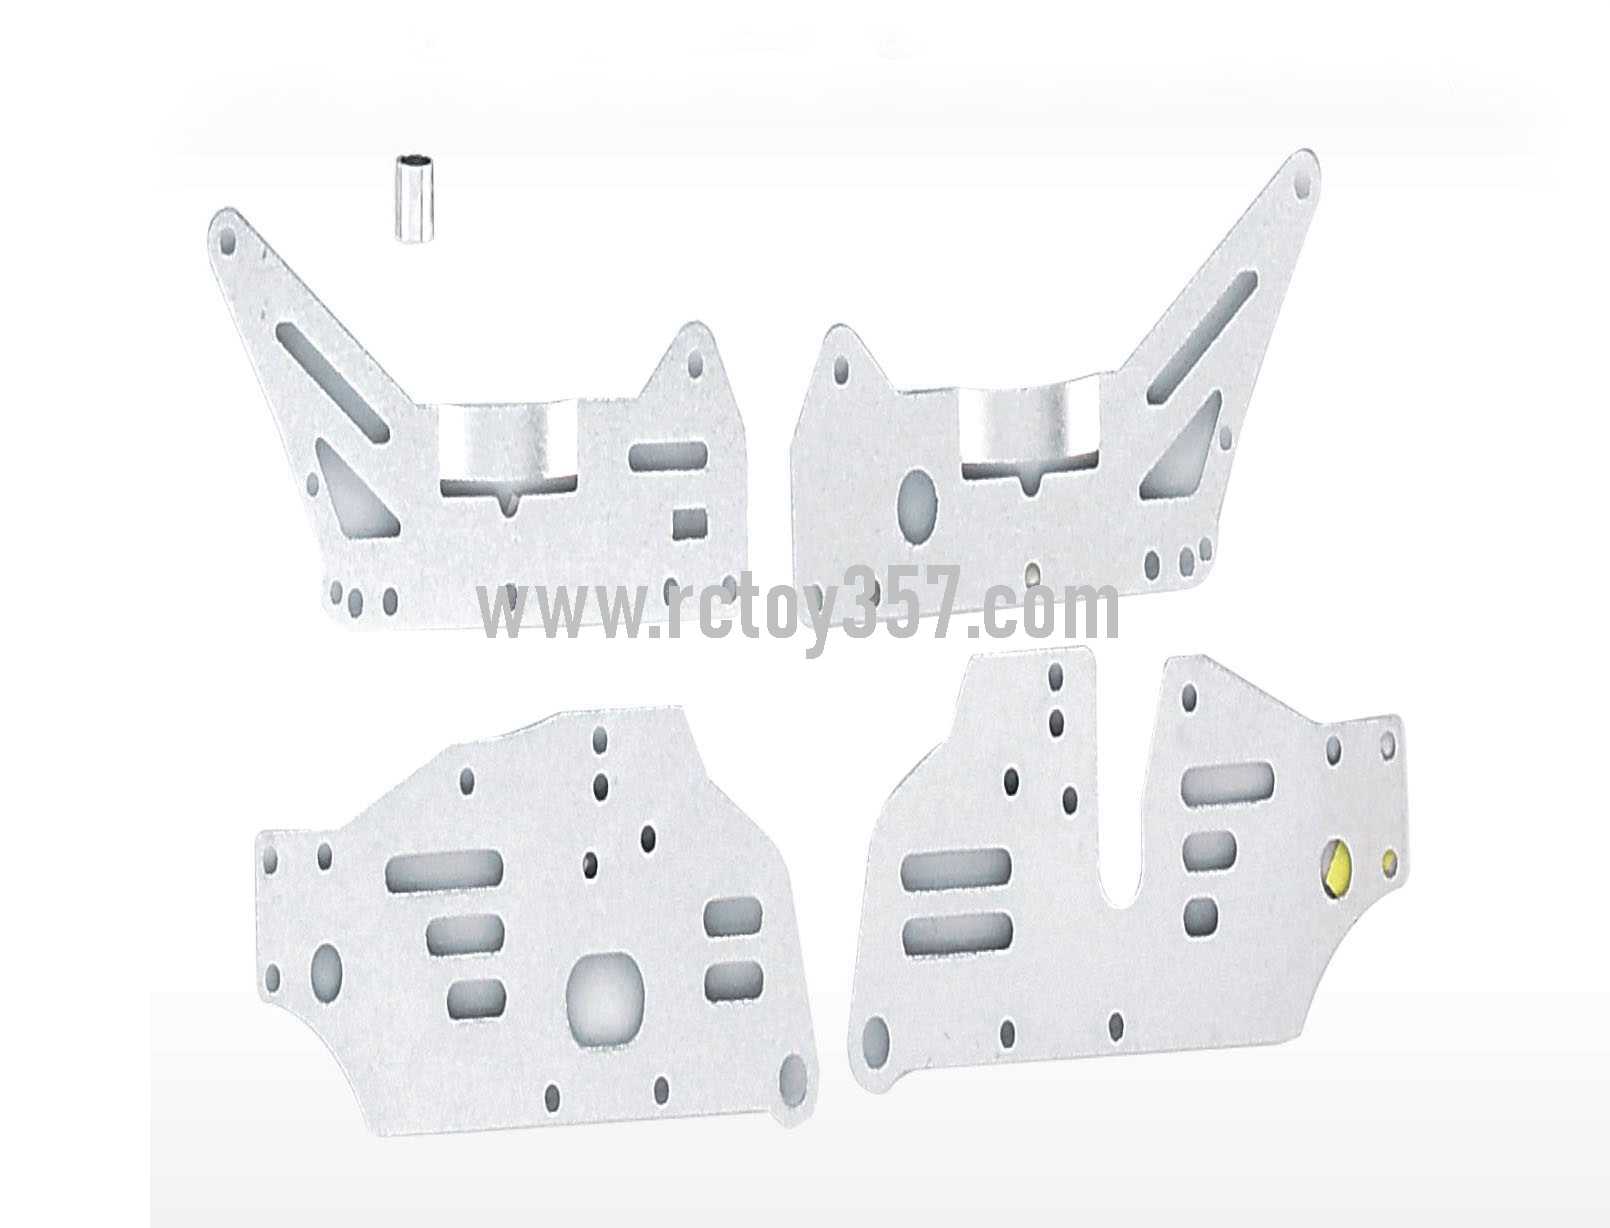 RCToy357.com - Shuang Ma/Double Hors 9103 toy Parts Metal frame